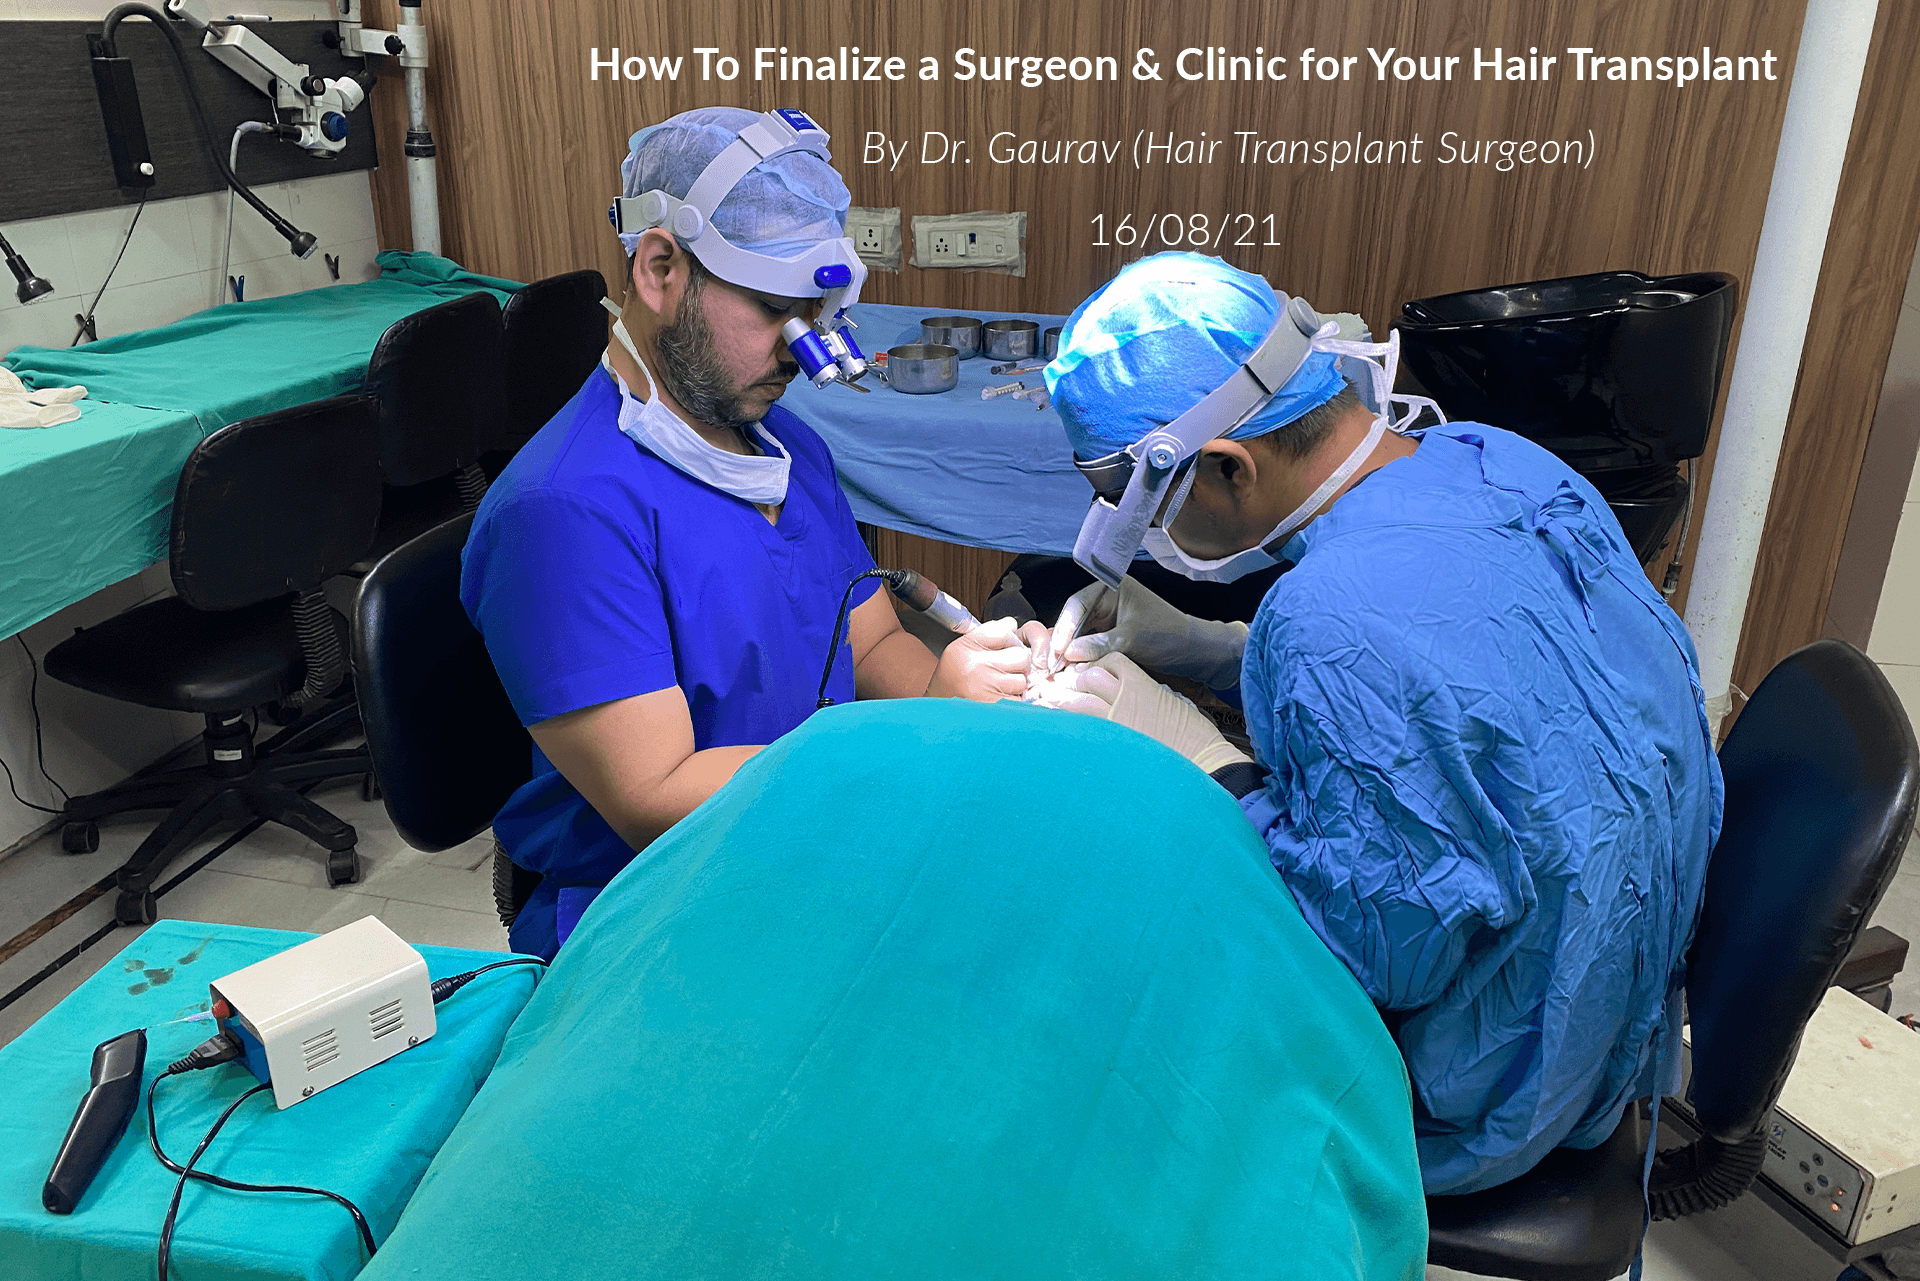 How To Finalize a Surgeon & Clinic for Your Hair Transplant?